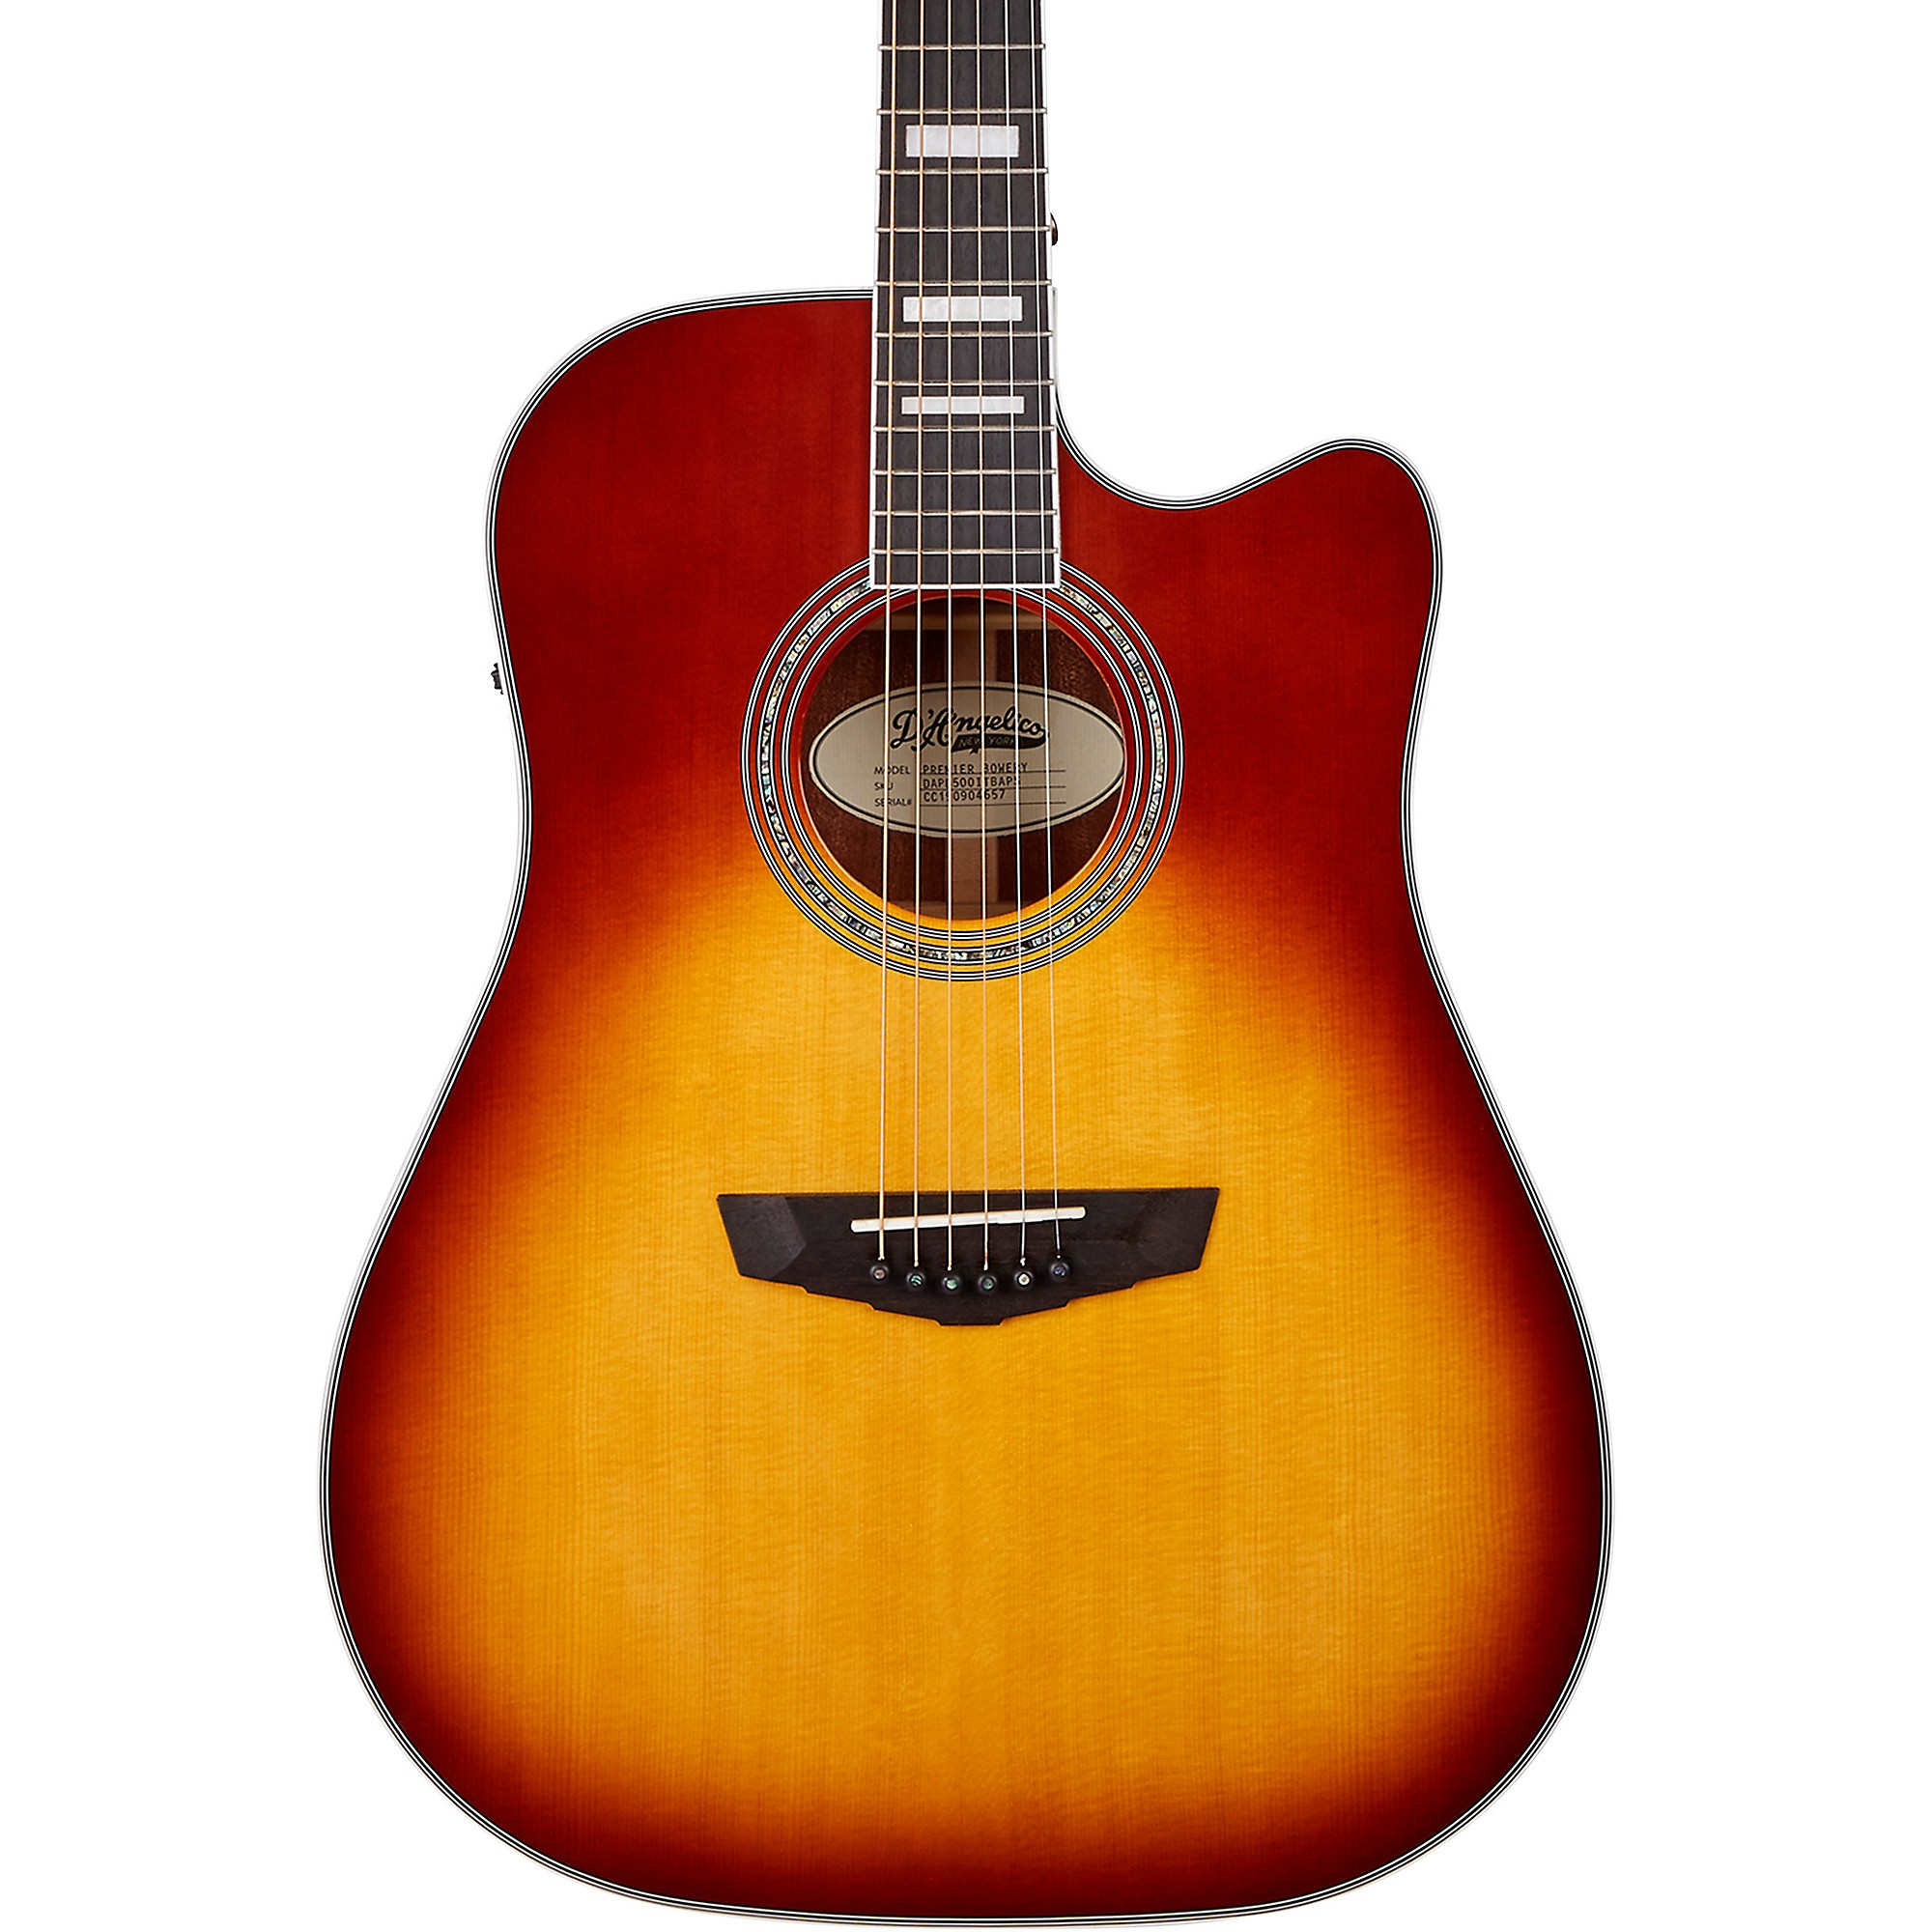 D'Angelico Premier Series Bowery Cutaway Dreadnought Acoustic